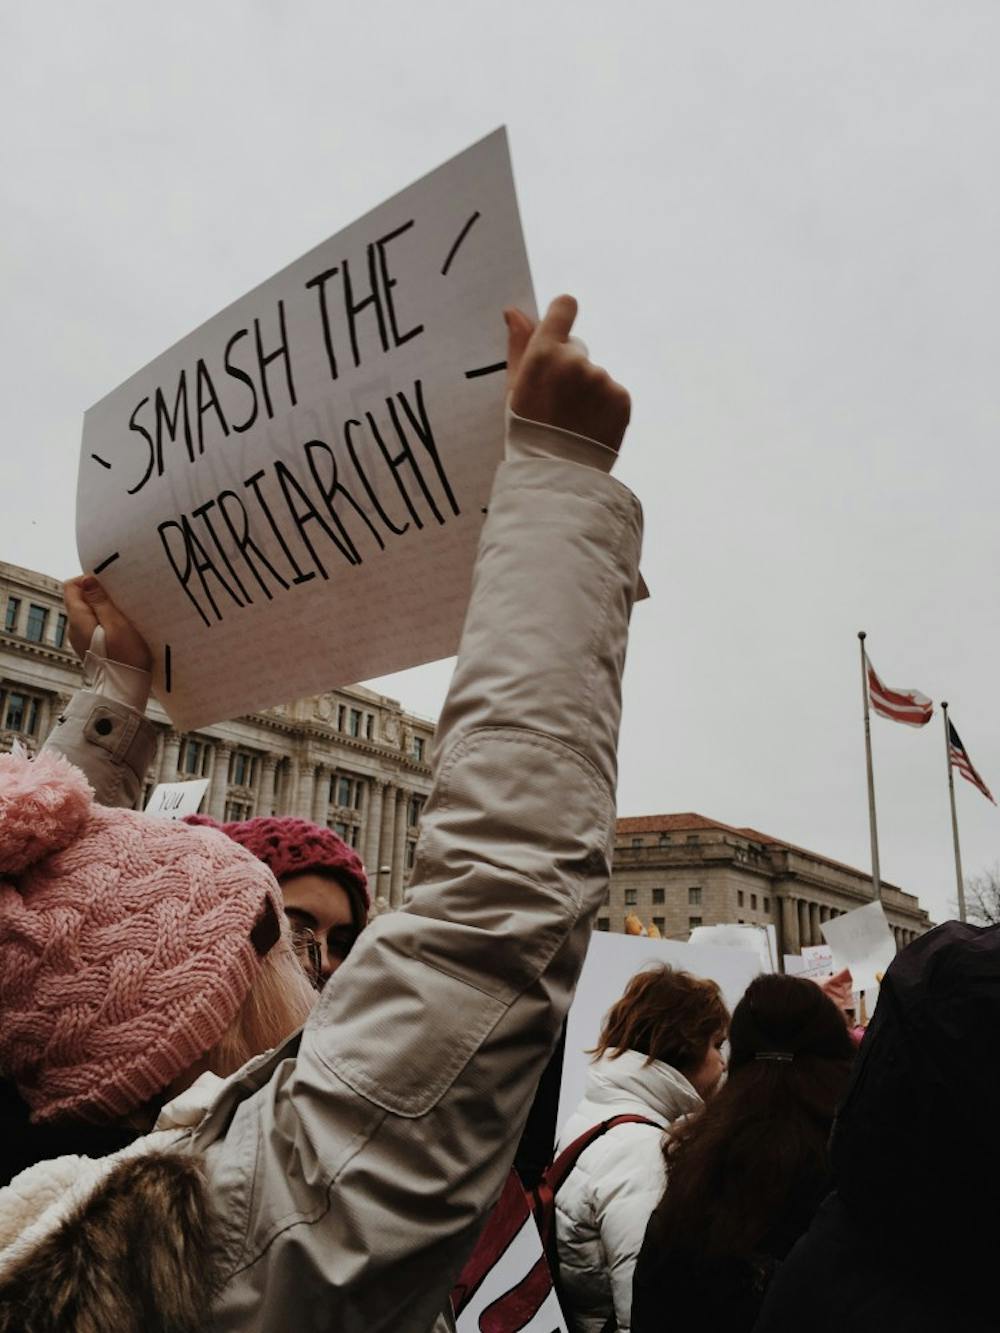 Smash the patriarchy sign at the Women's March in Washington D.C.